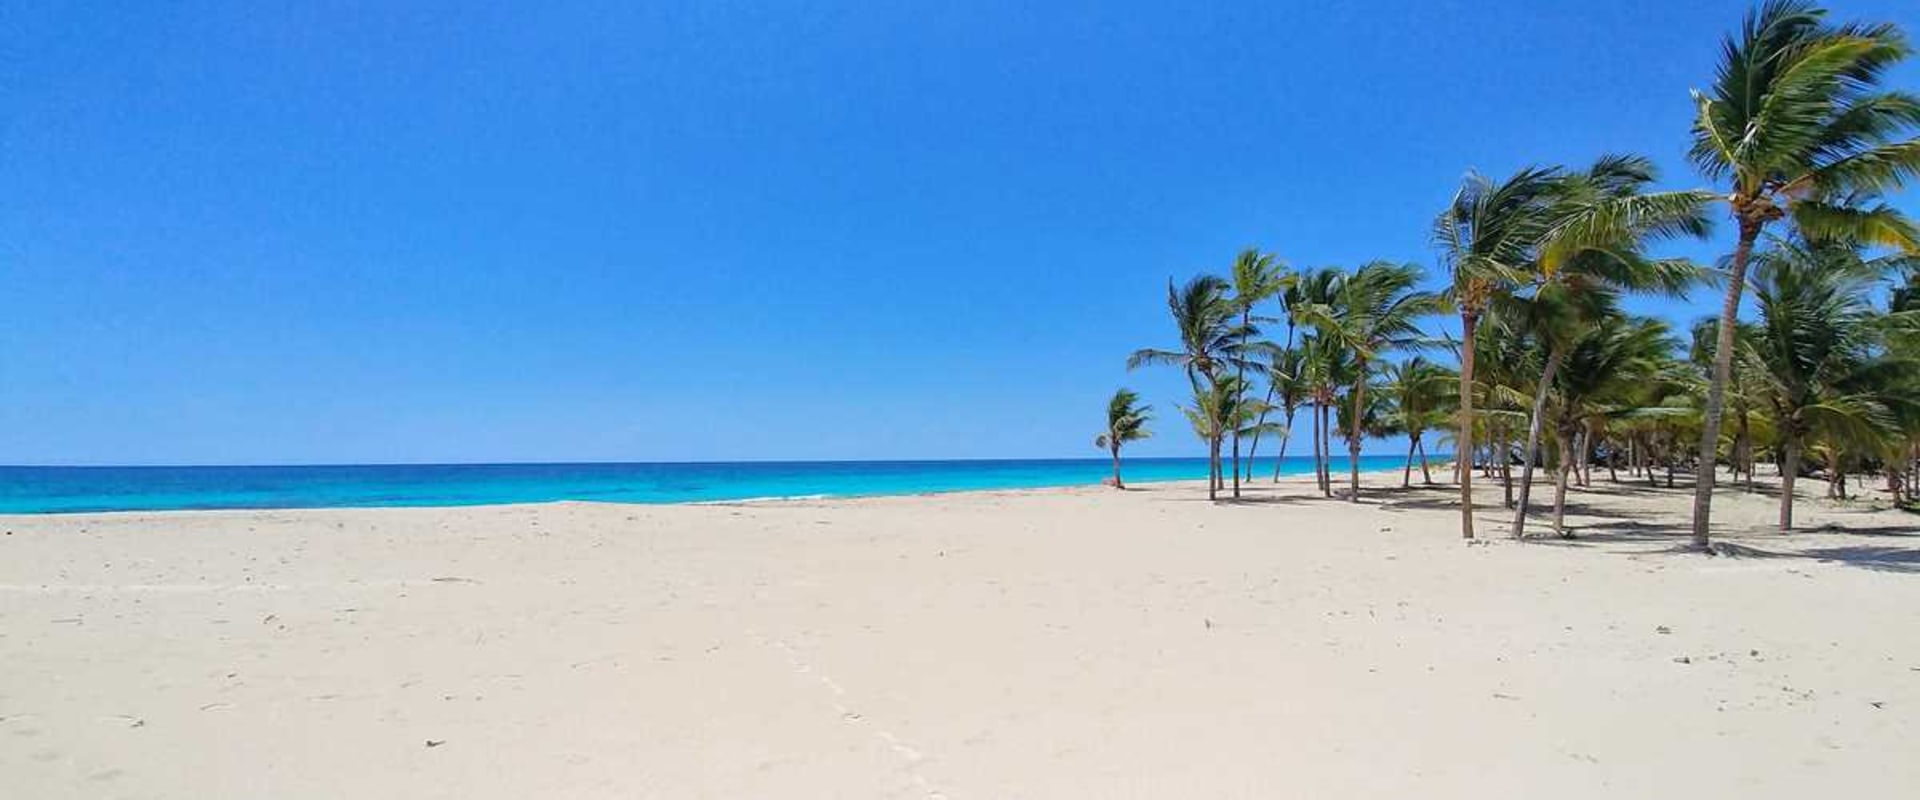 What is the Weather Like in Punta Cana?